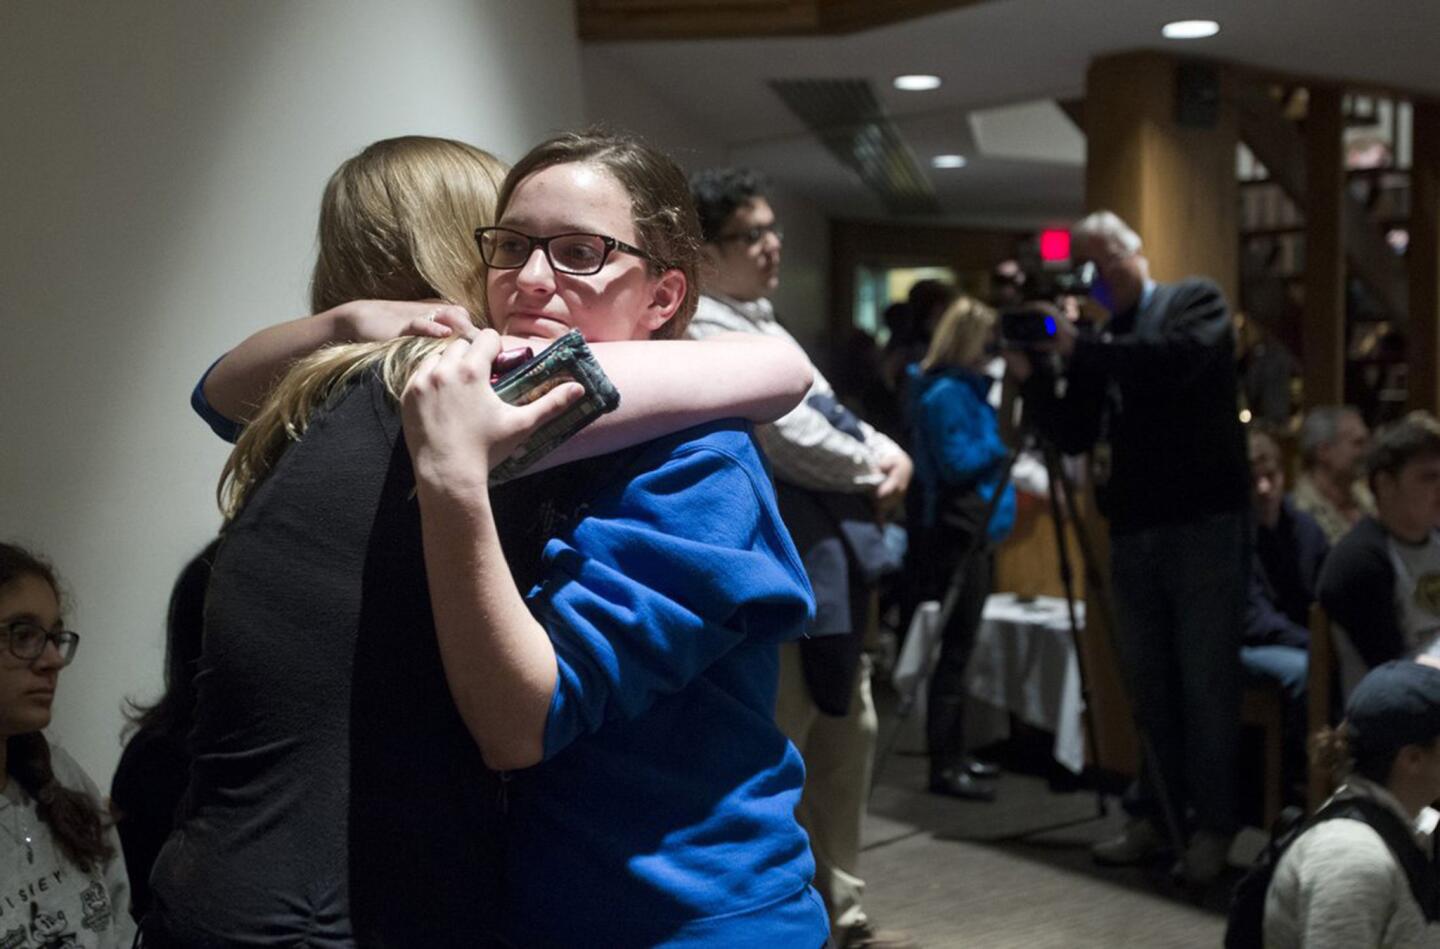 Rachel Trout, 16, a student at Blue Valley High School, gets a hug from a a friend after addressing a crowd gathered to mourn the Jewish shooting victims at St. Thomas the Apostle Episcopal Church in Overland Park, Kan. On Sunday, Trout was inside the Jewish Community Center of Greater Kansas City, the first of two sites to be targeted by a gunman.